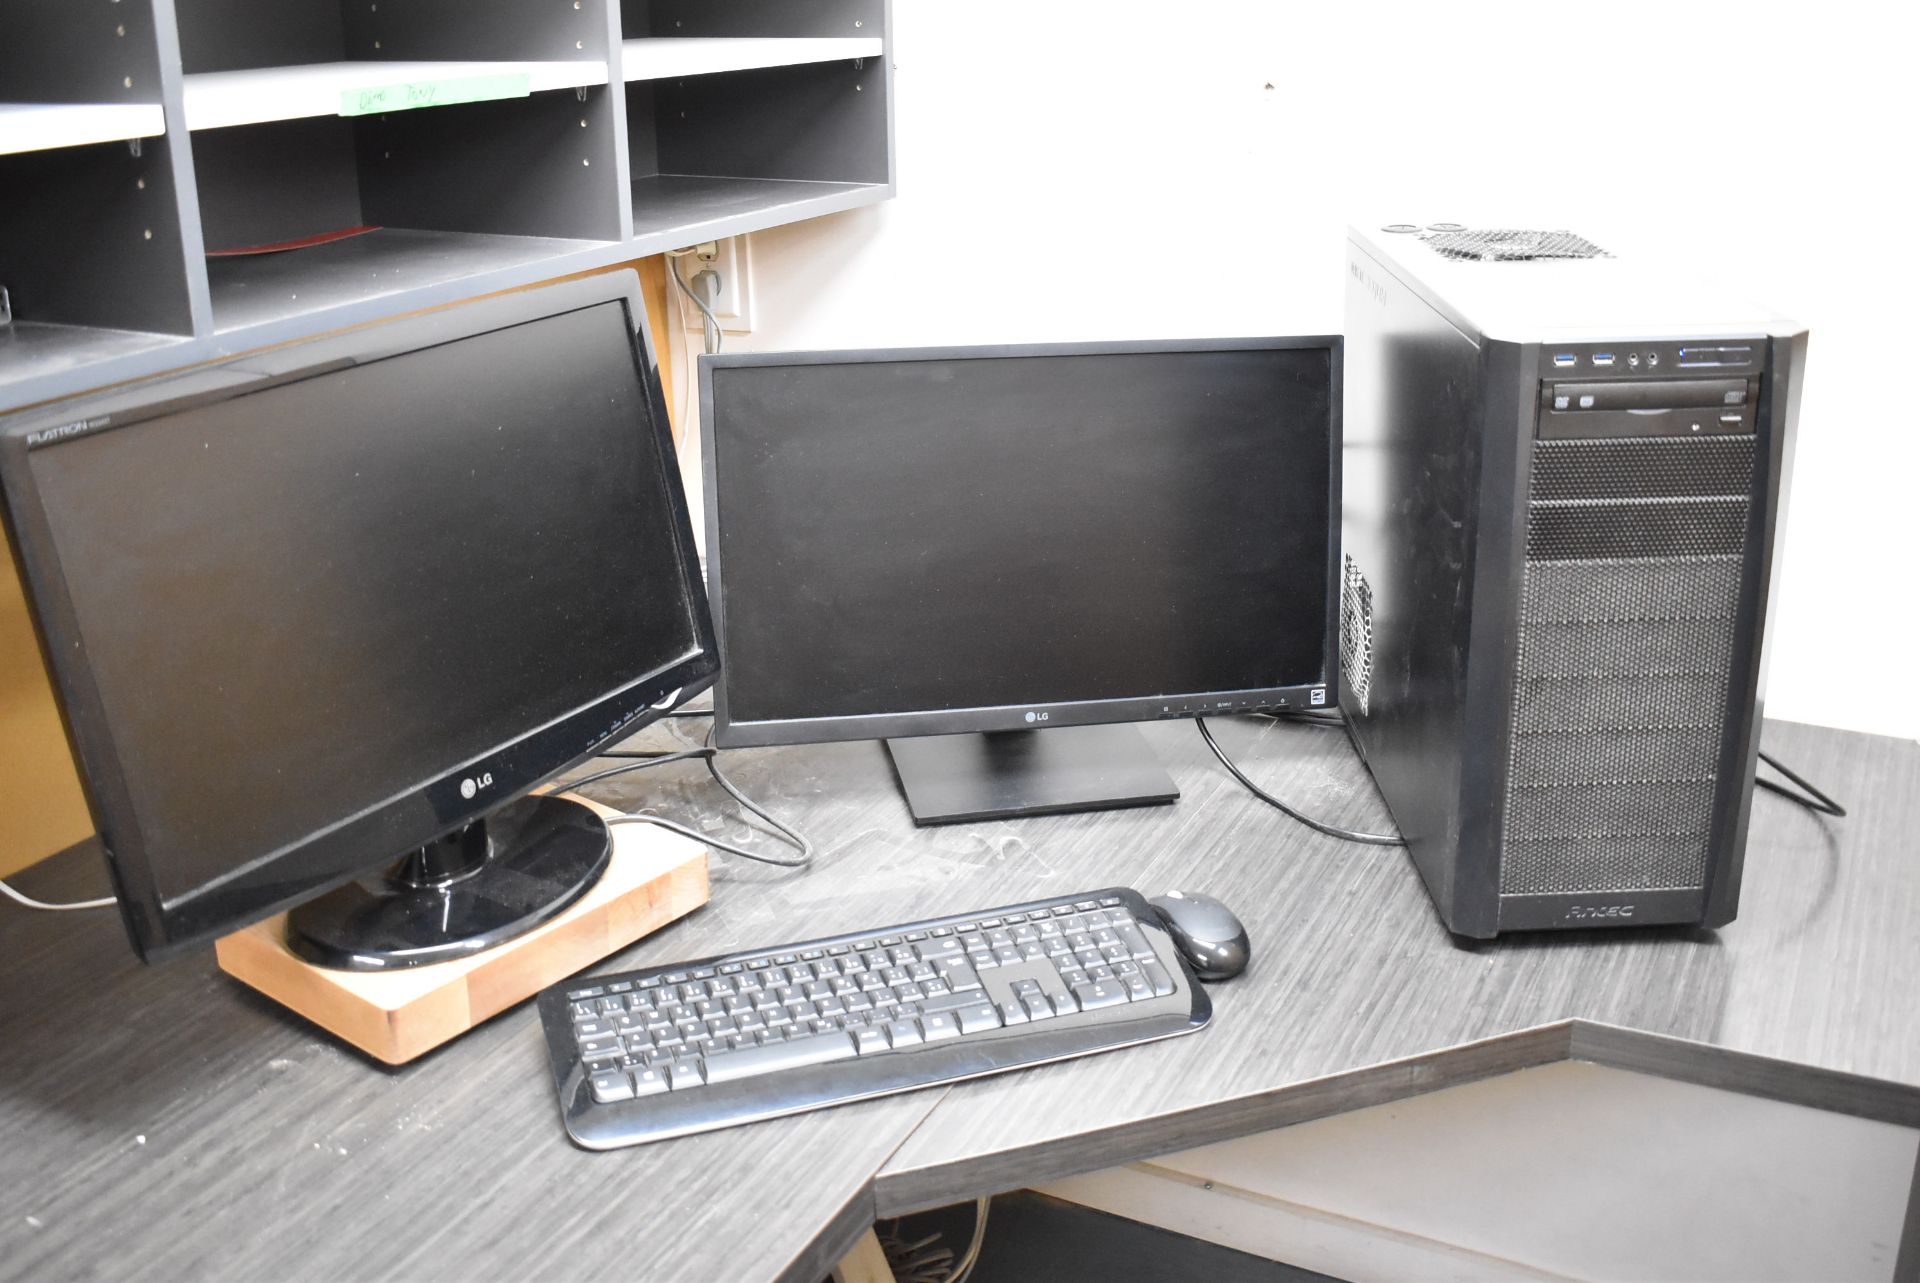 LOT/ ANTEC DESKTOP COMPUTER WITH (2) LG MONITORS, KEYBOARD AND MOUSE [RIGGING FEE FOR LOT #162 - $